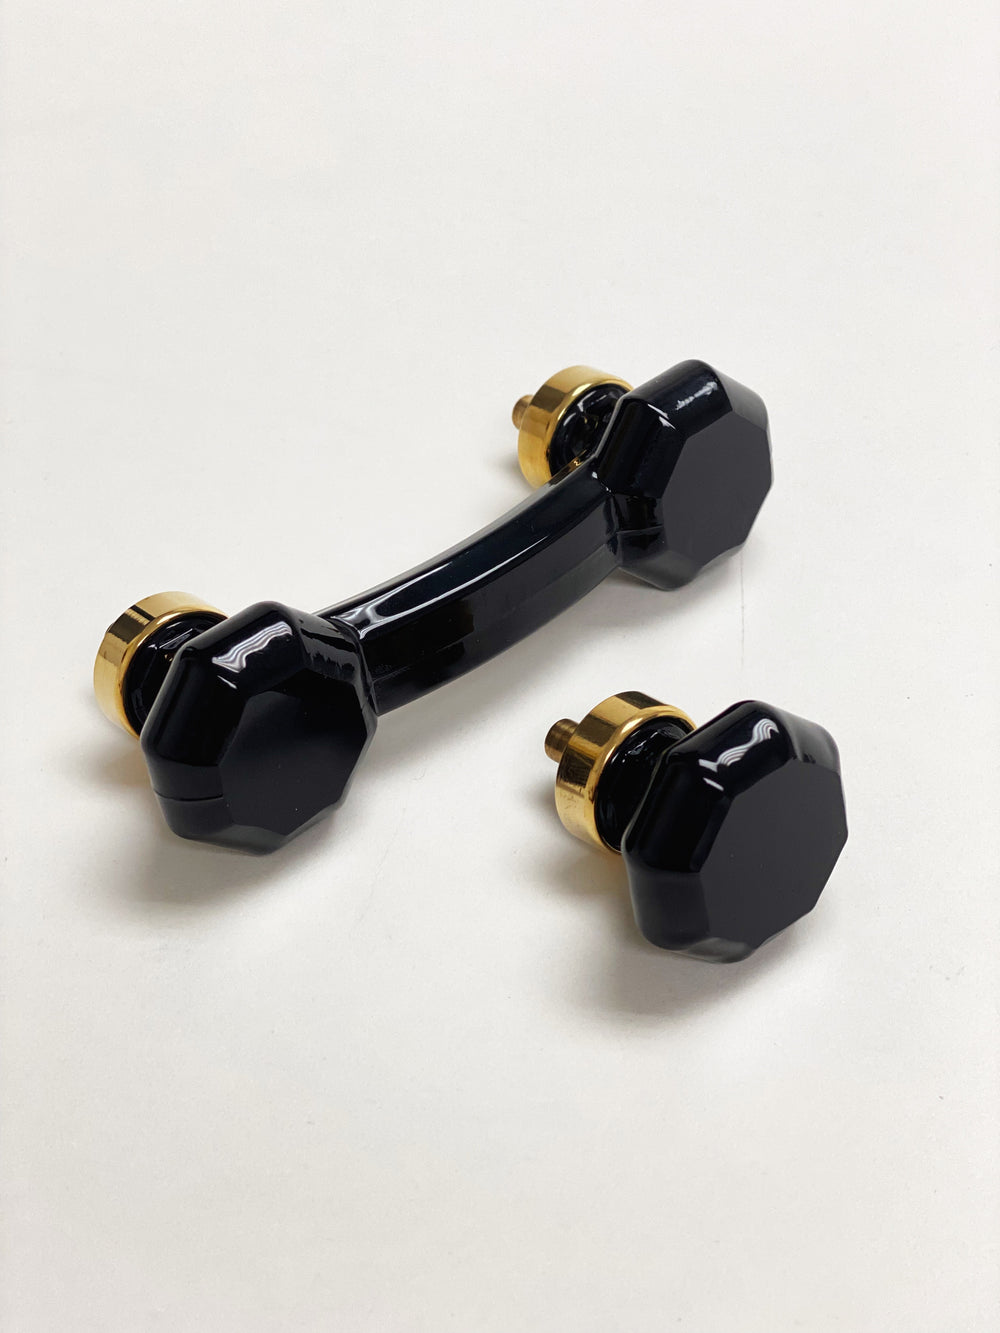 Unlacquered Polished Brass and Black Glass Cabinet Knob and Drawer Pull - Purdy Hardware - 